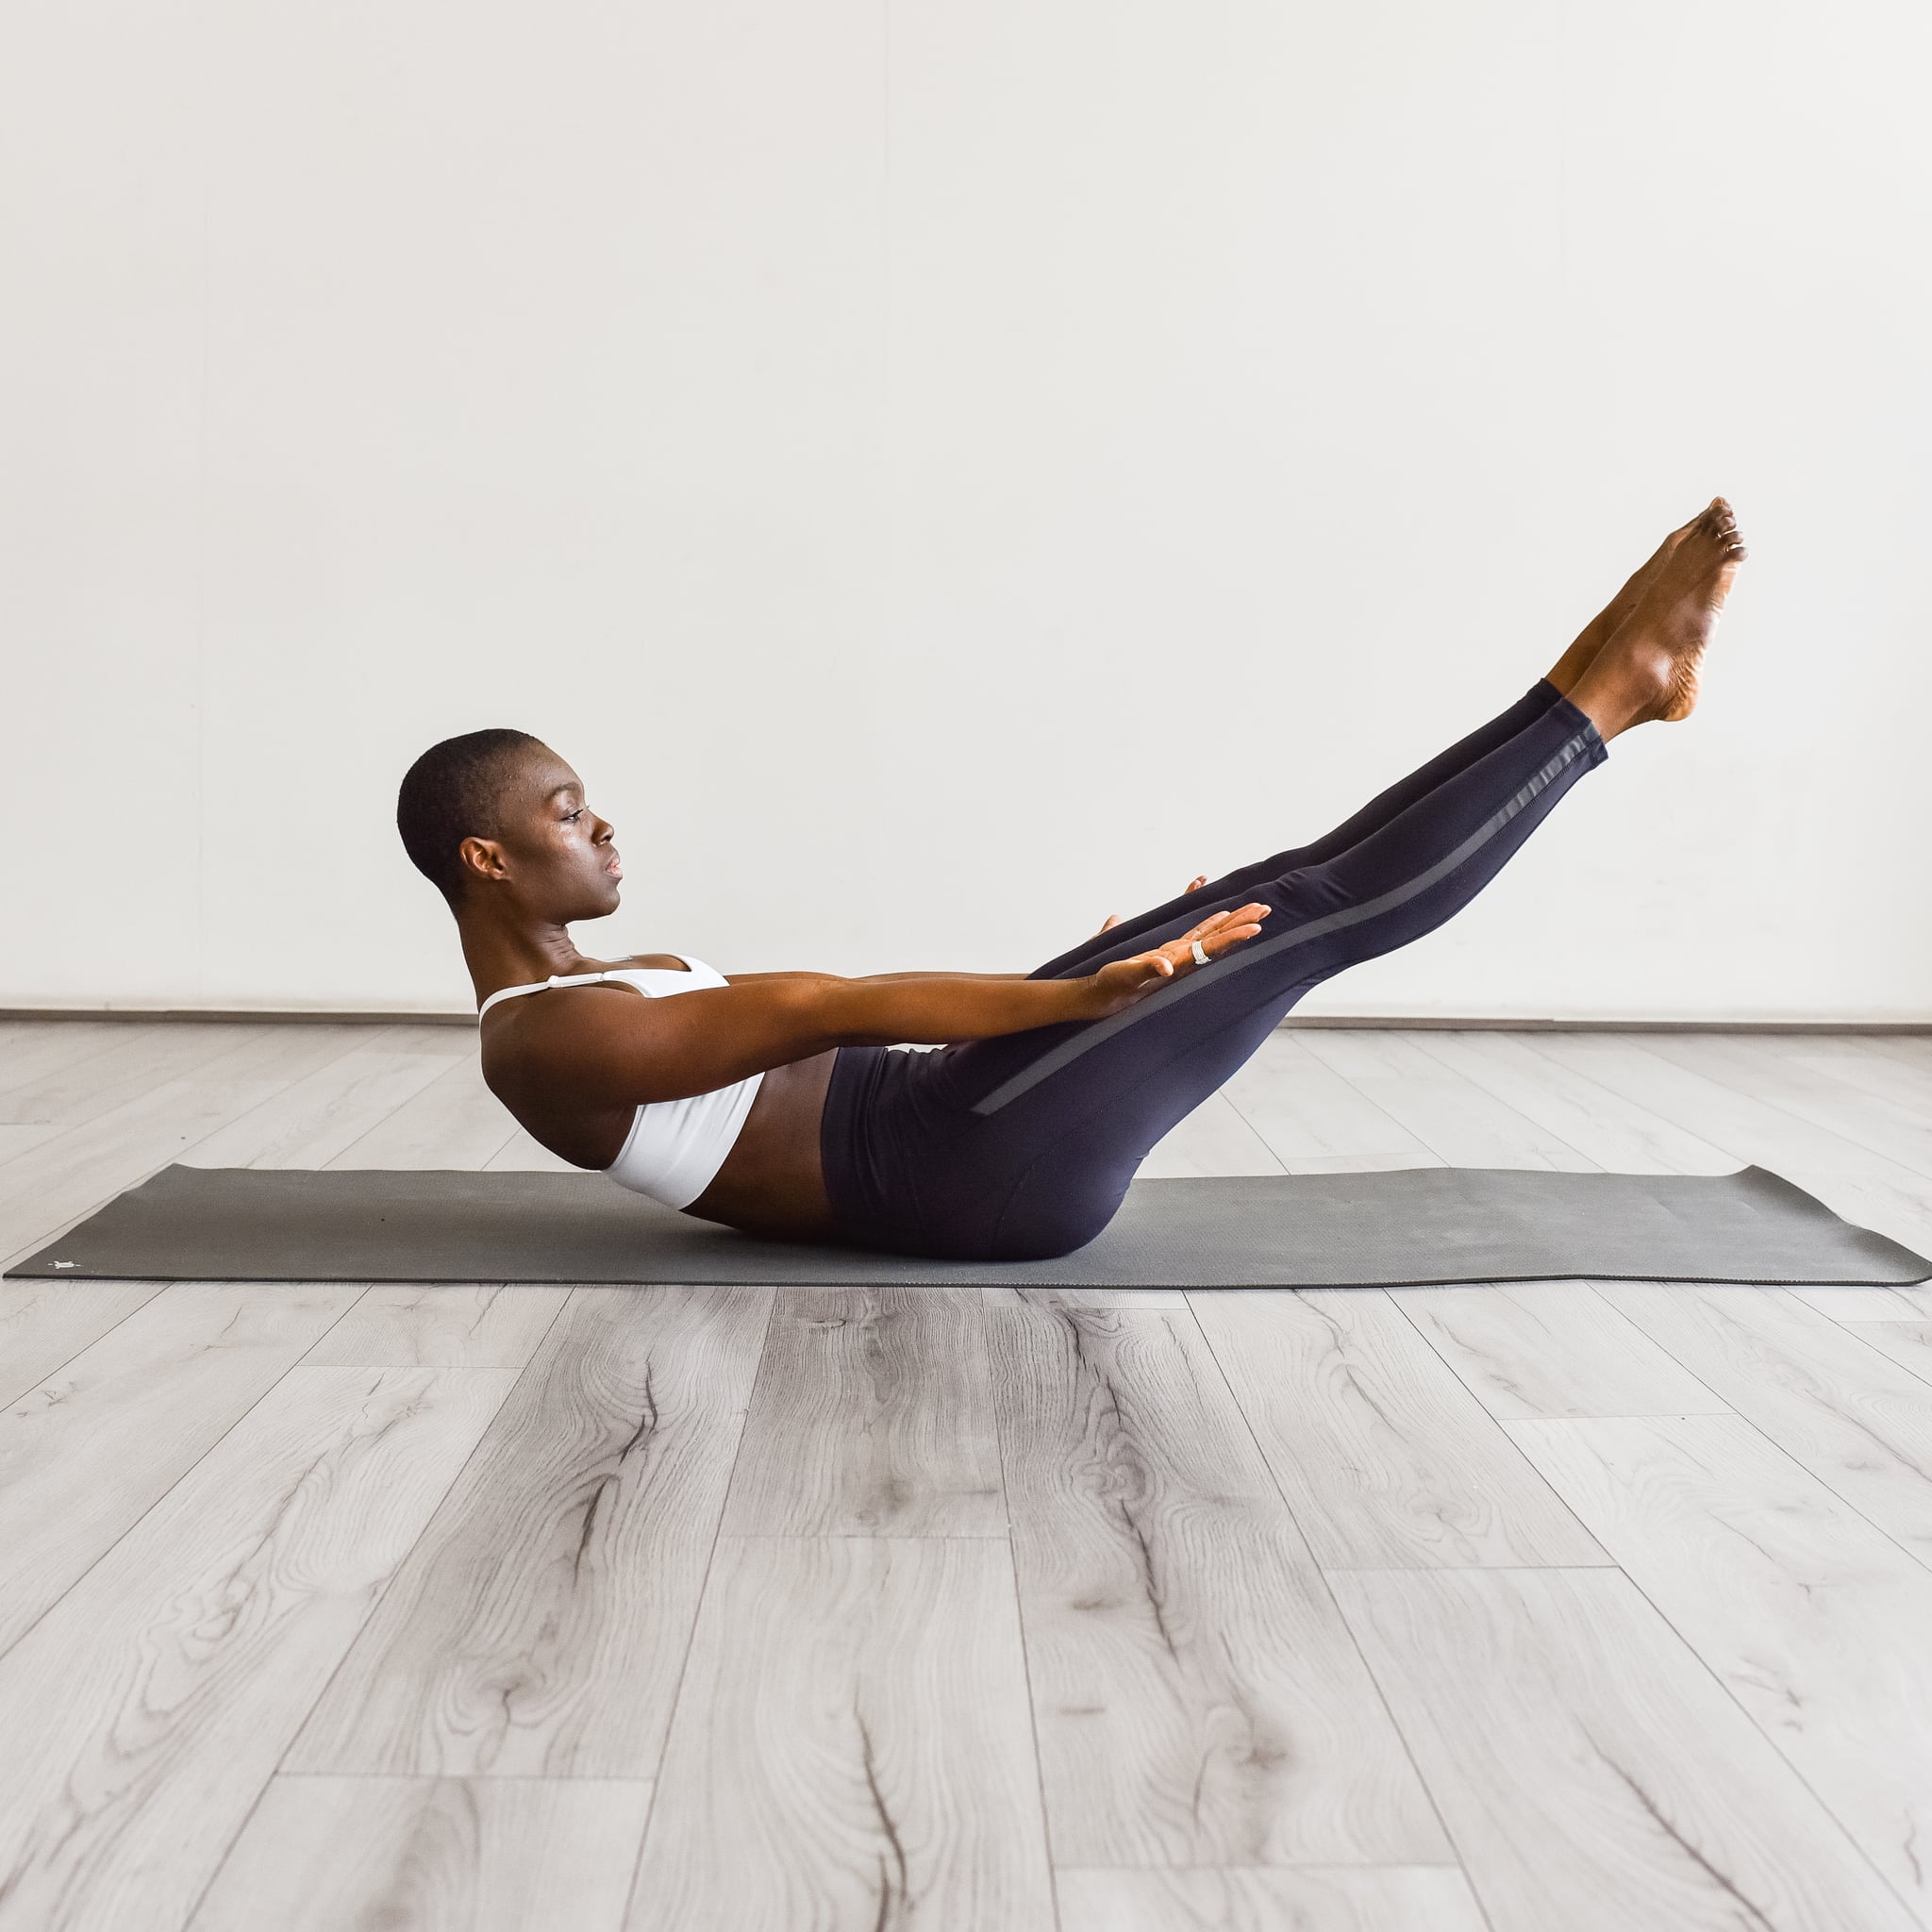 Pilates Exercises For Beginners: 10 Moves To Build Your Core